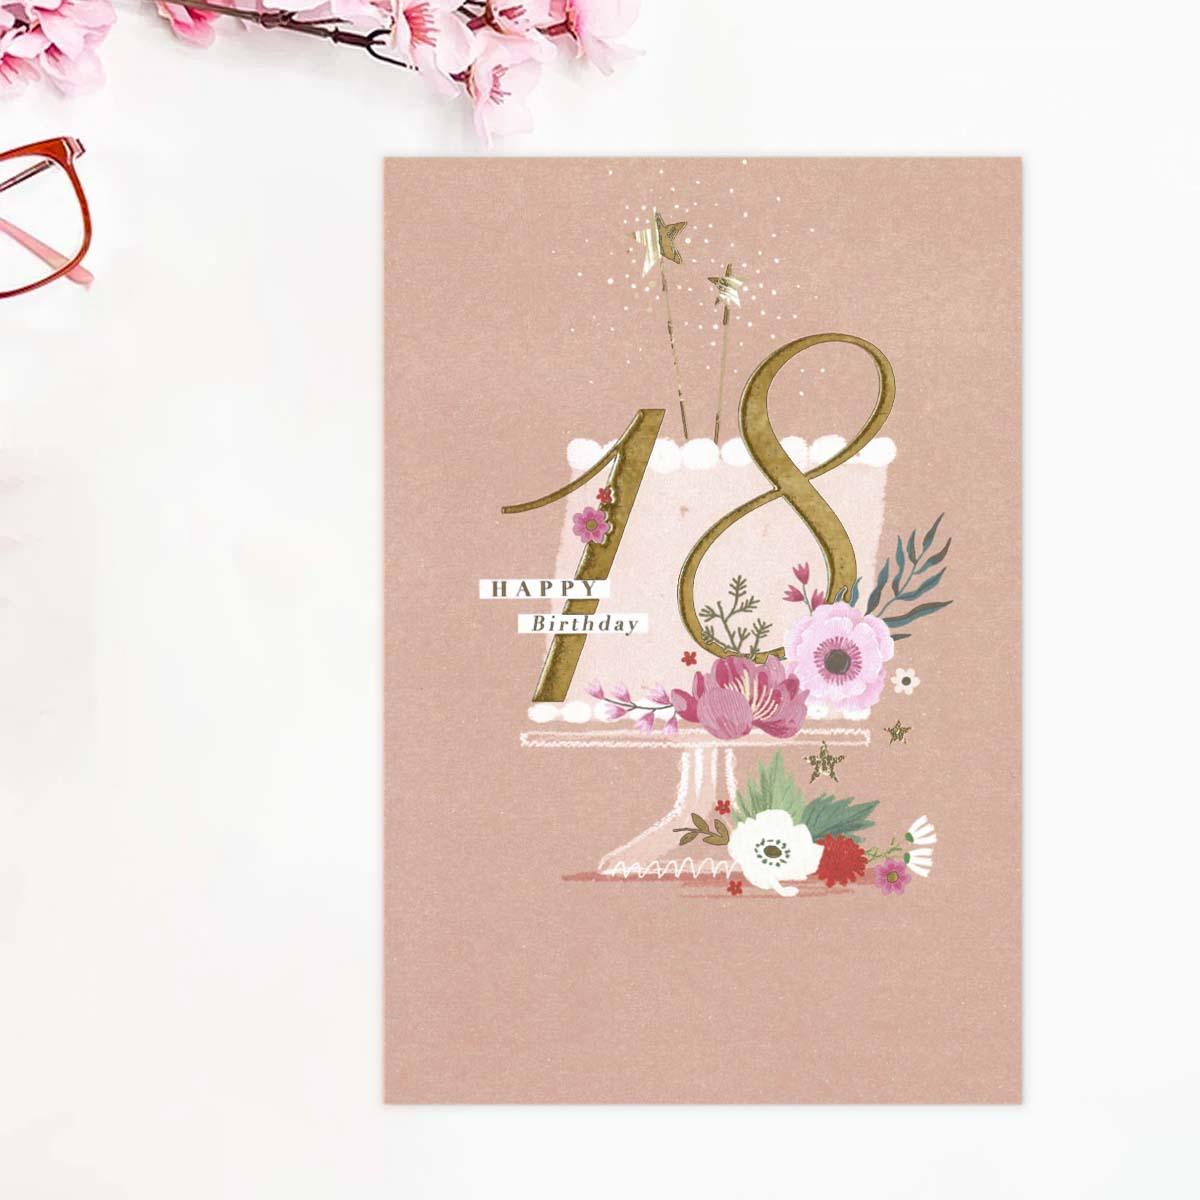 Happy Birthday 18 Peach Card Front Image